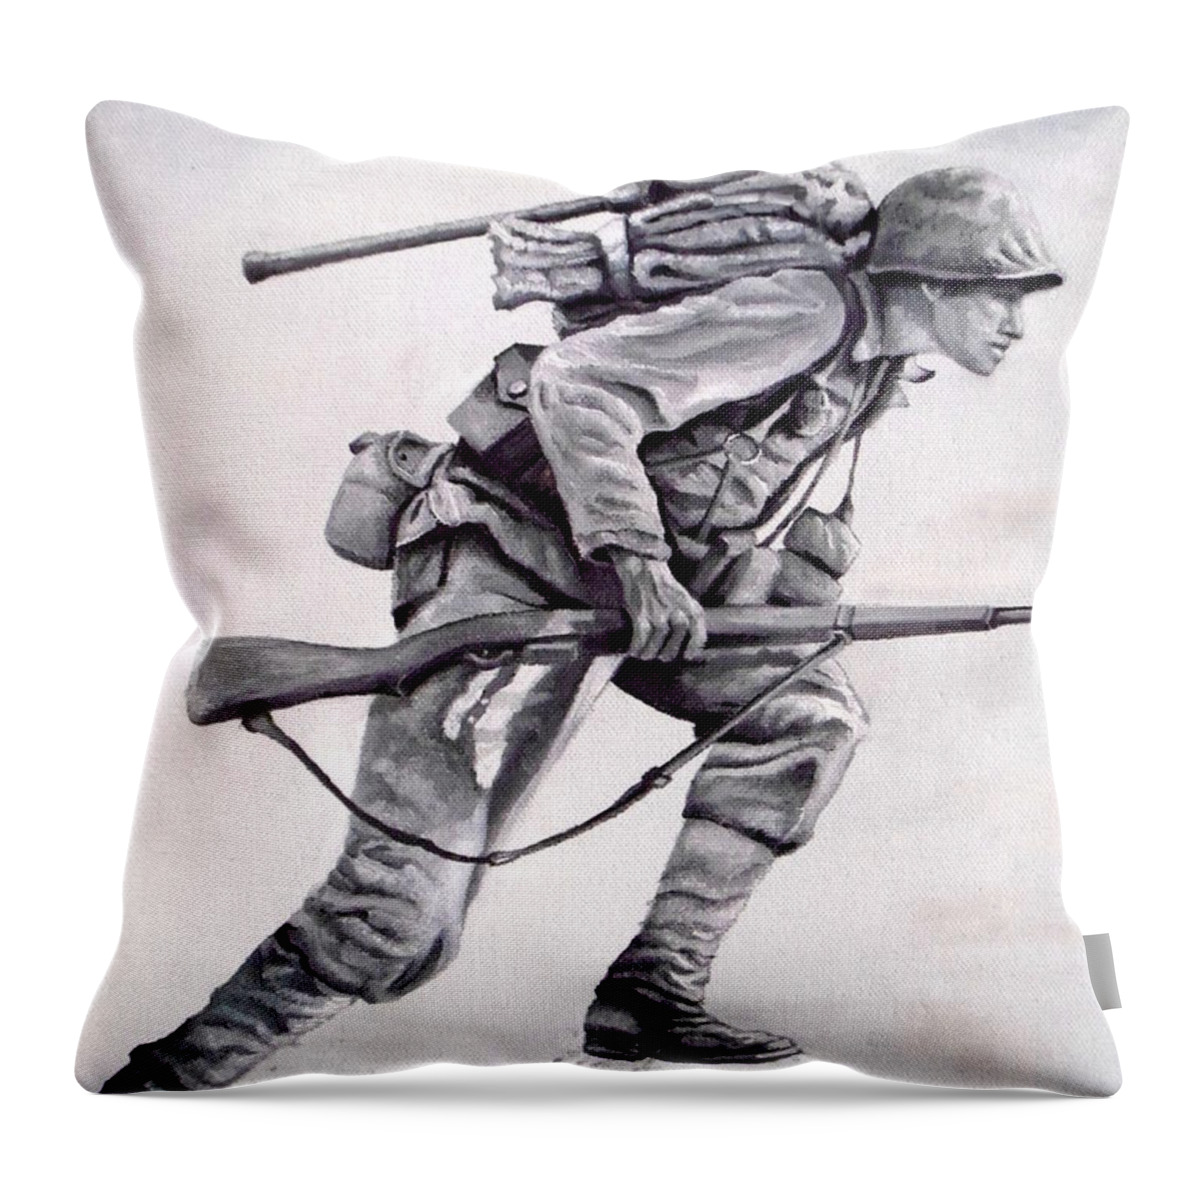 A U.s. Marine Charging The Beach On Iwo Jima Throw Pillow featuring the painting Follow Me by Martin Schmidt